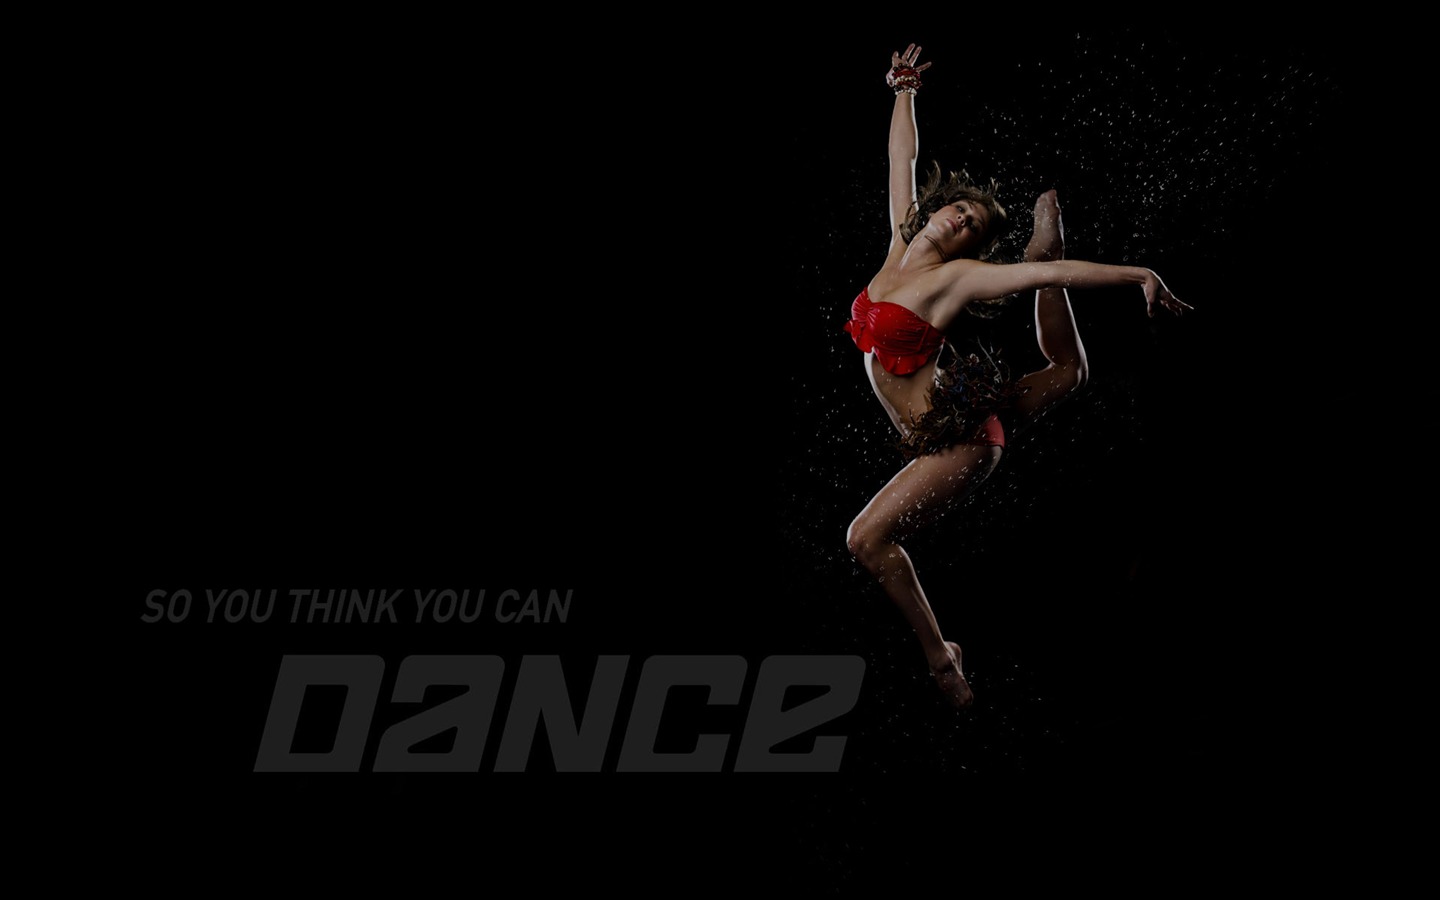 So You Think You Can Dance 舞林争霸 壁纸(二)13 - 1440x900